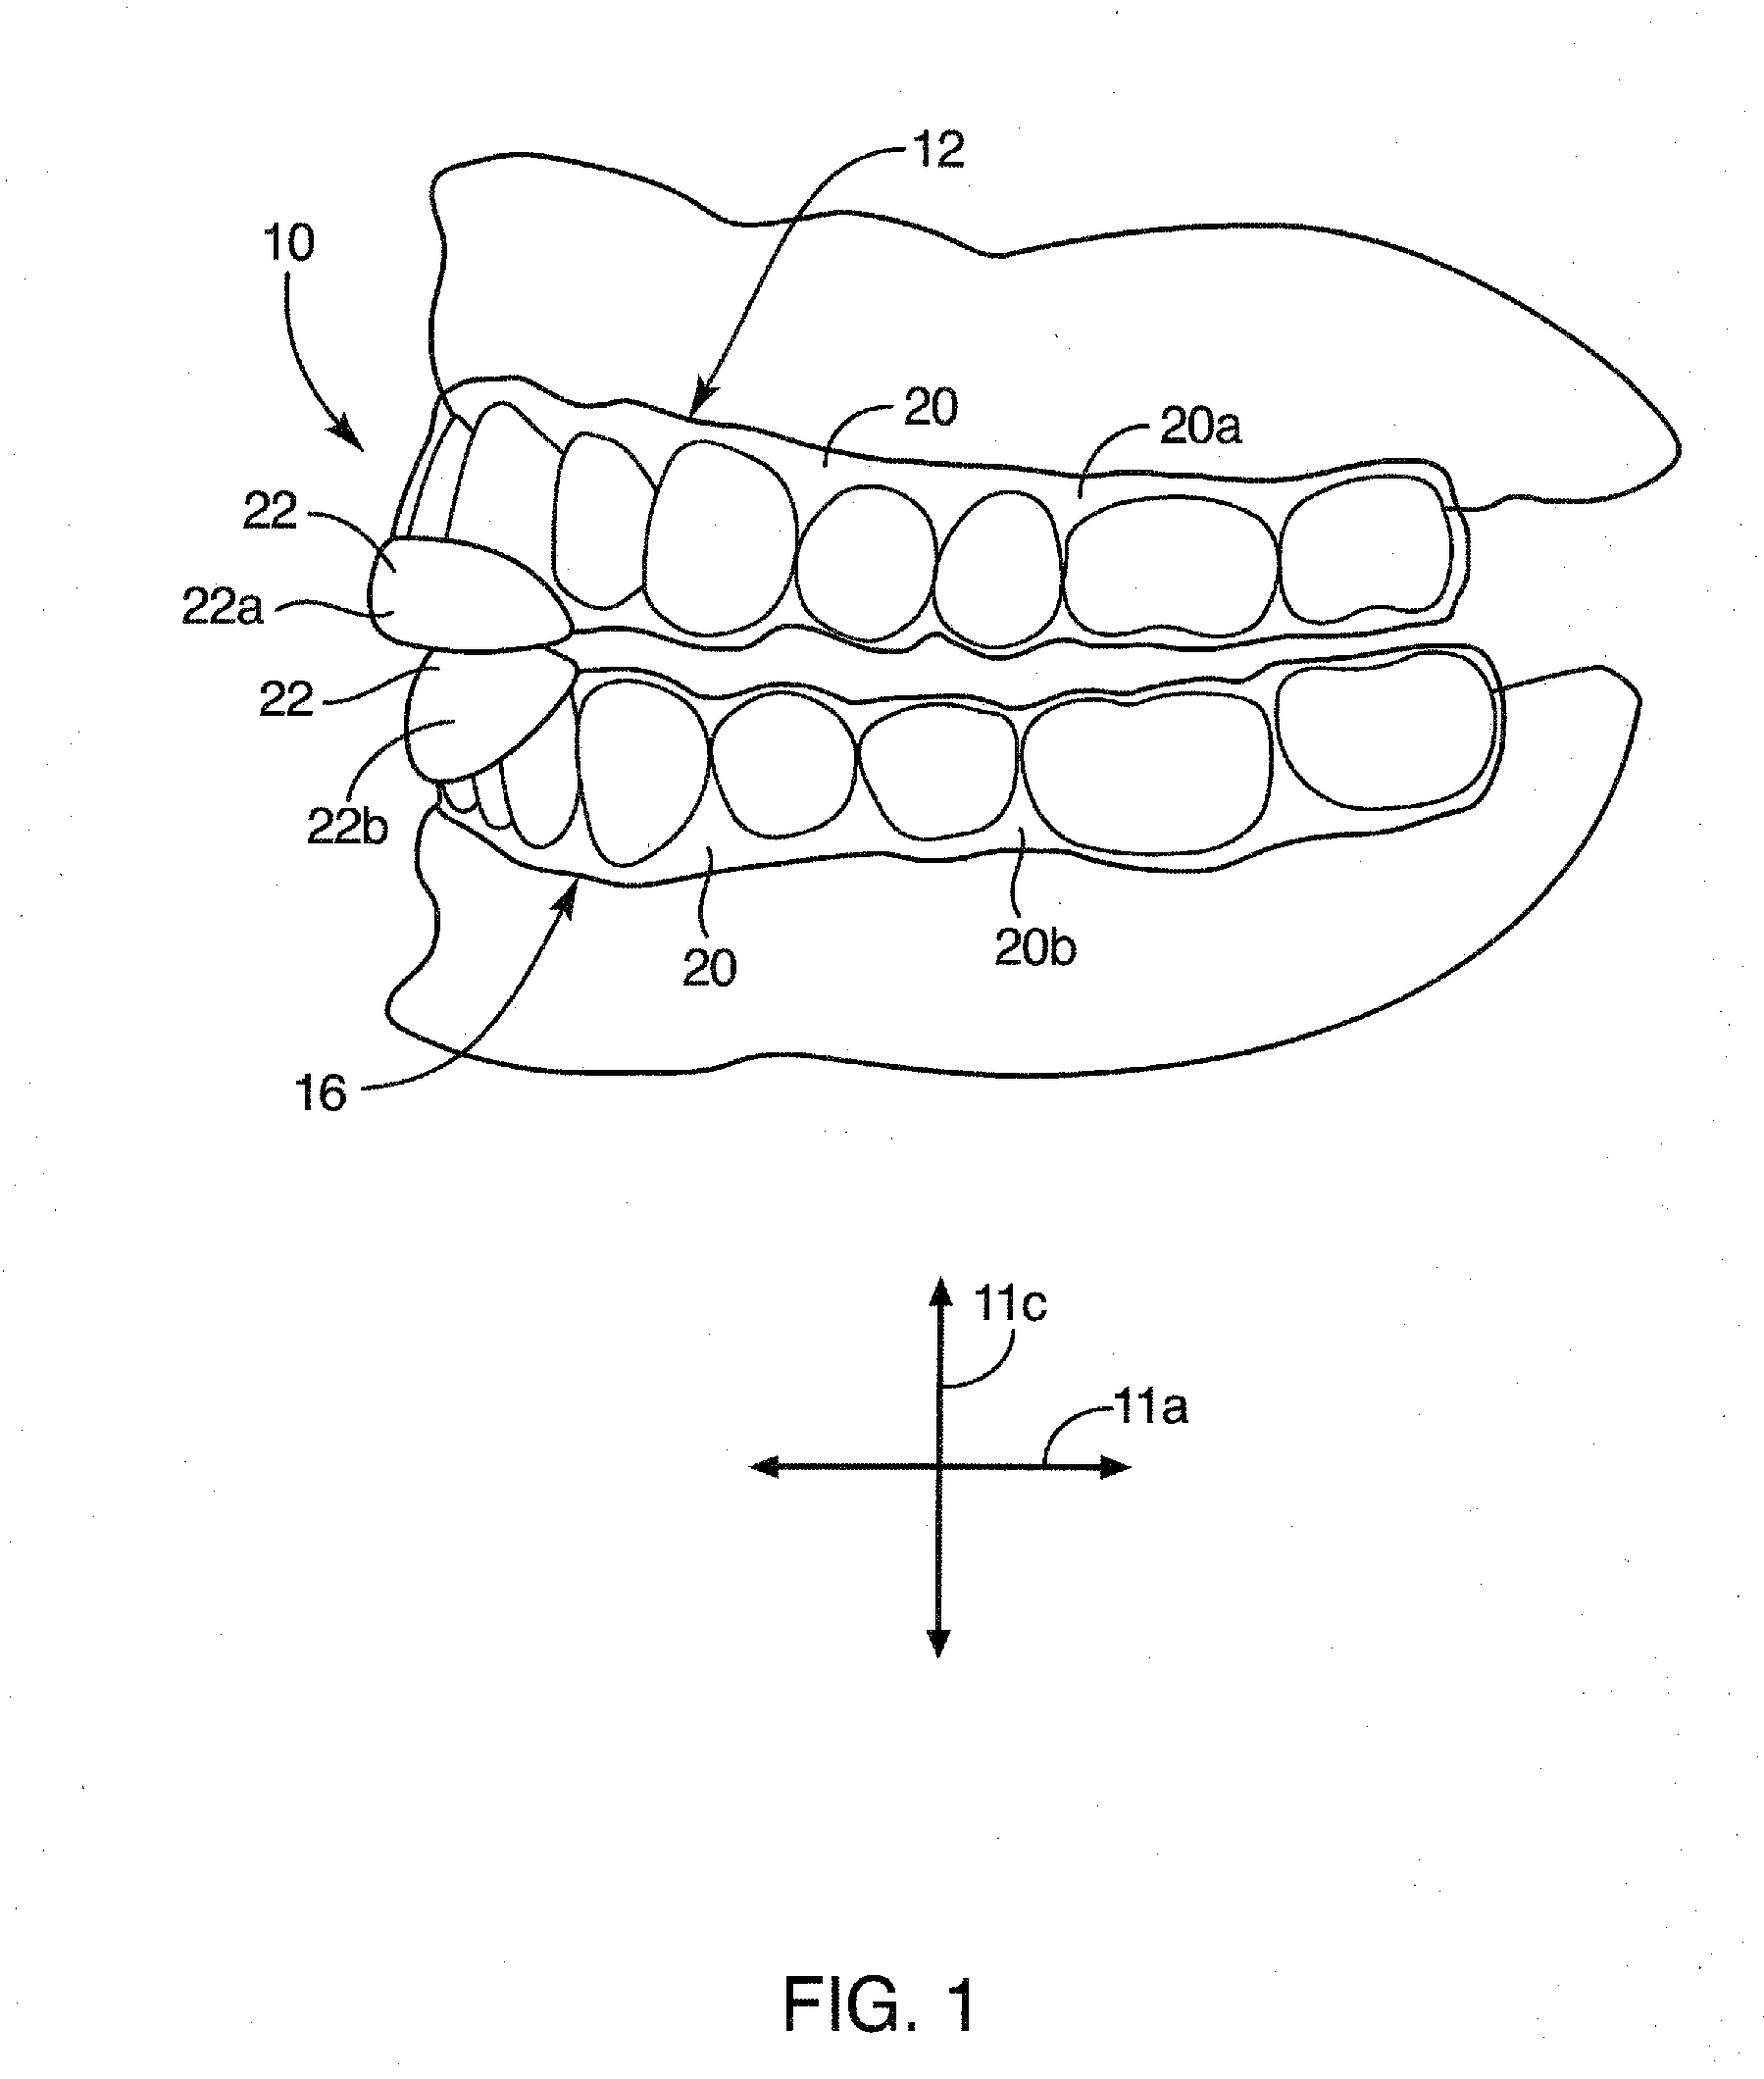 Dental appliance for treatment of bruxism